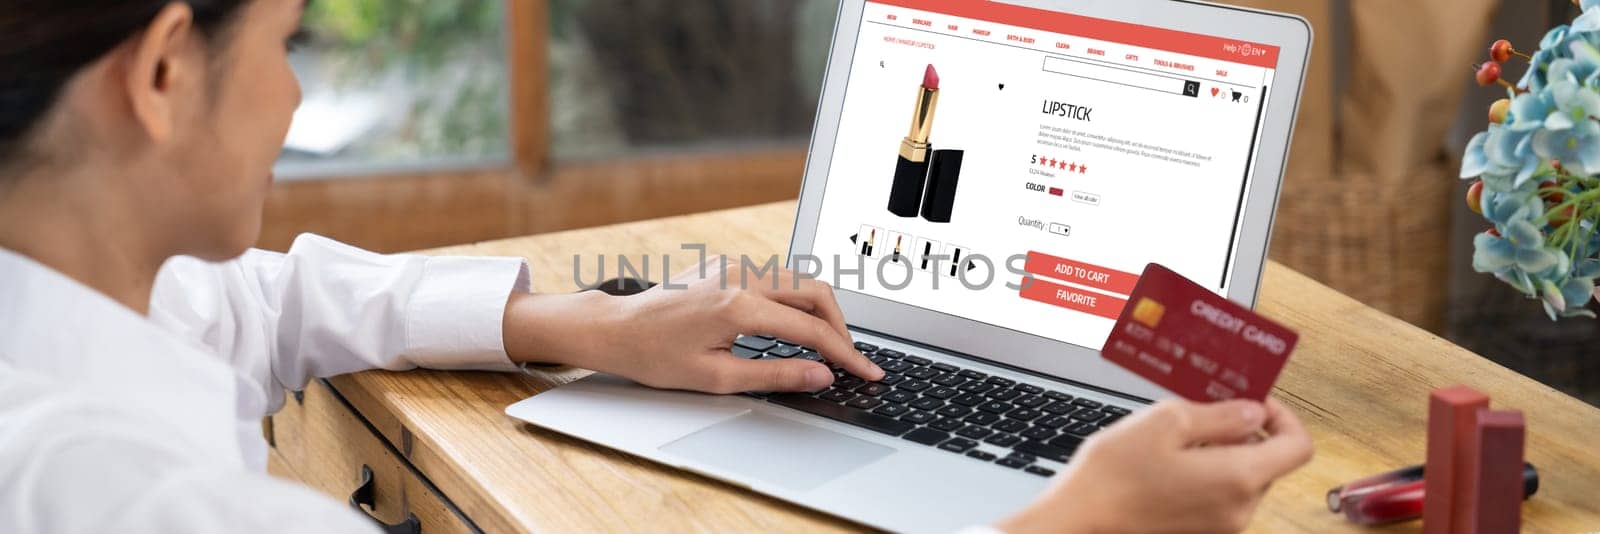 Woman shopping online on internet marketplace browsing for uttermost sale items by biancoblue